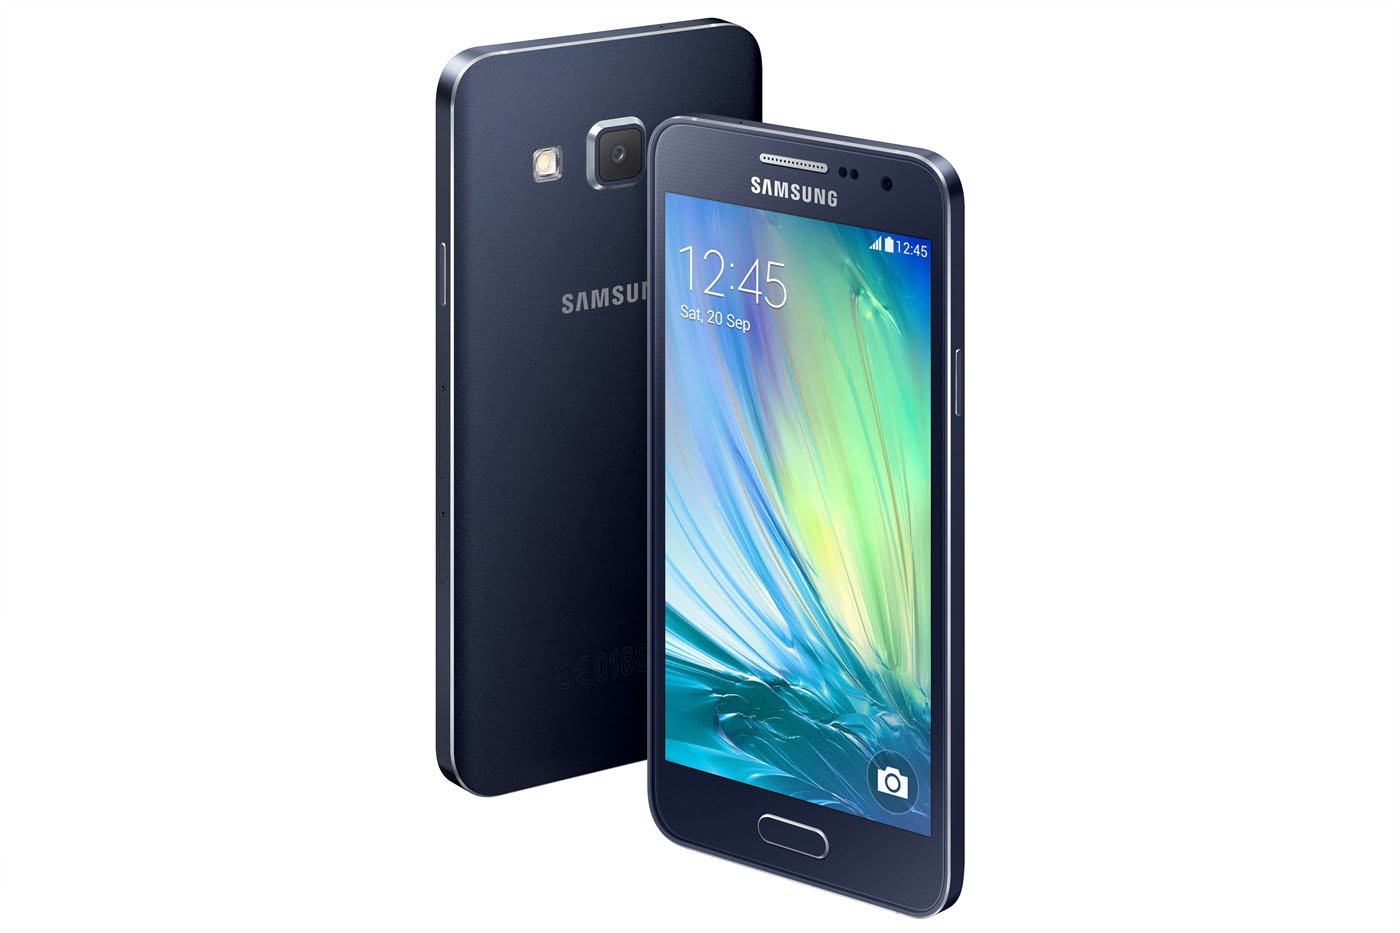 Samsung Galaxy A3 specs, review, release date - PhonesData